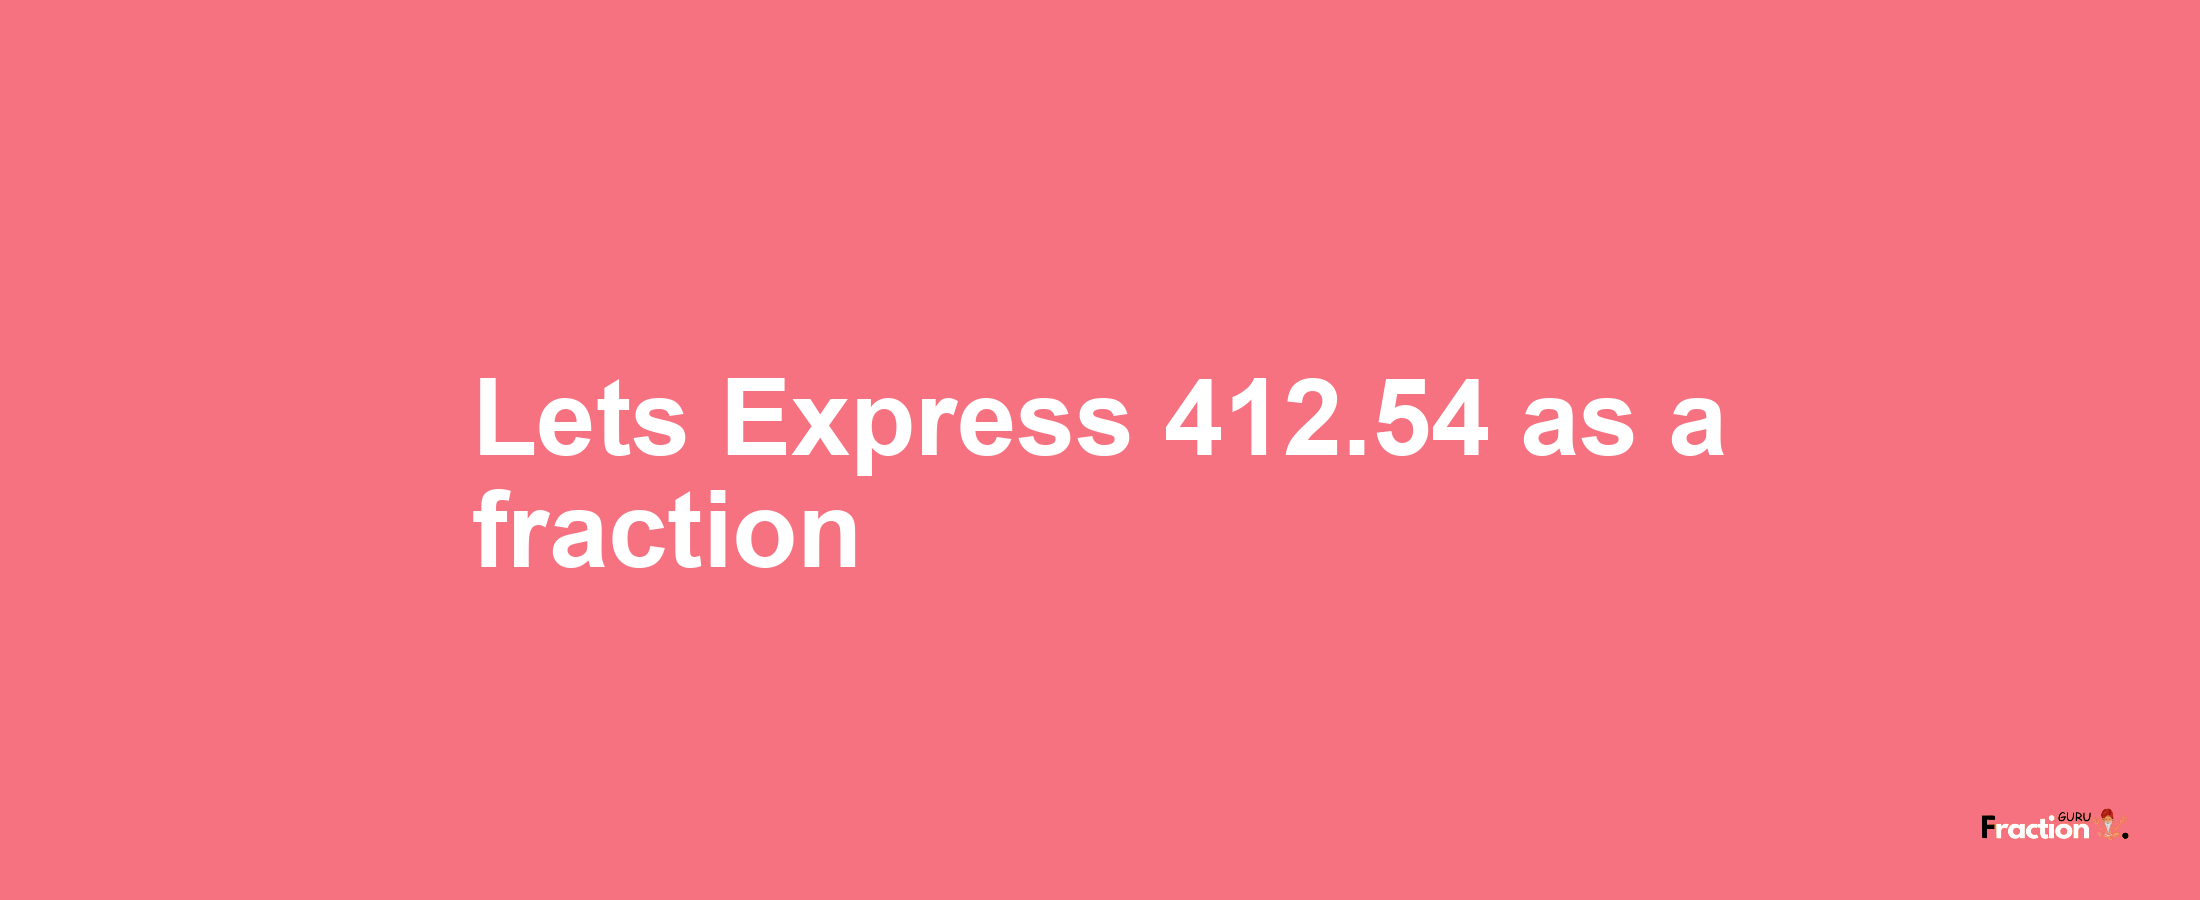 Lets Express 412.54 as afraction